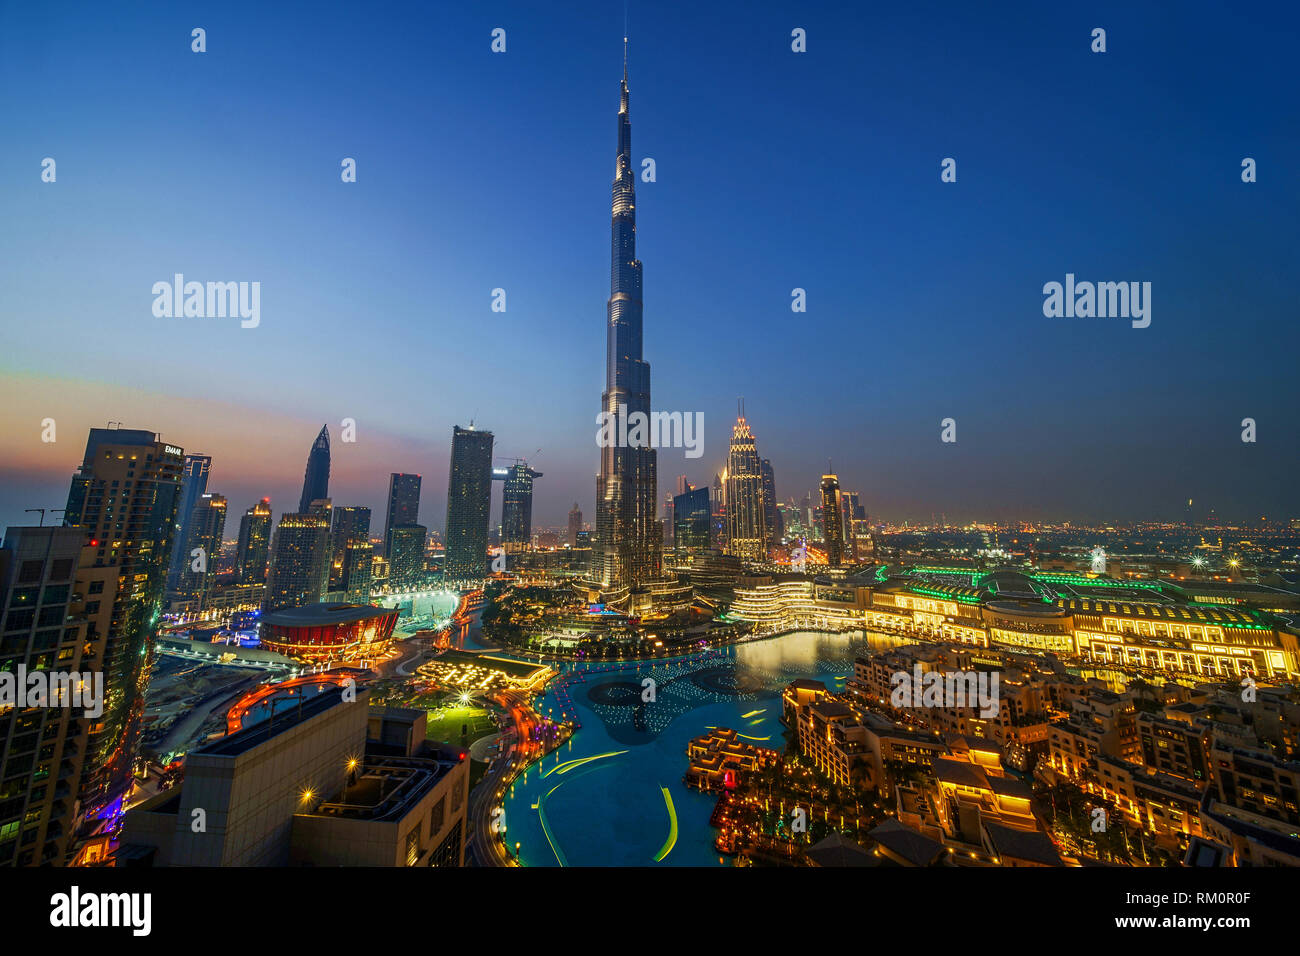 The Burj Khalifa soars 829 meters into the clear Arabian sky and towers over the luxuriant oasis of Dubai. Stock Photo